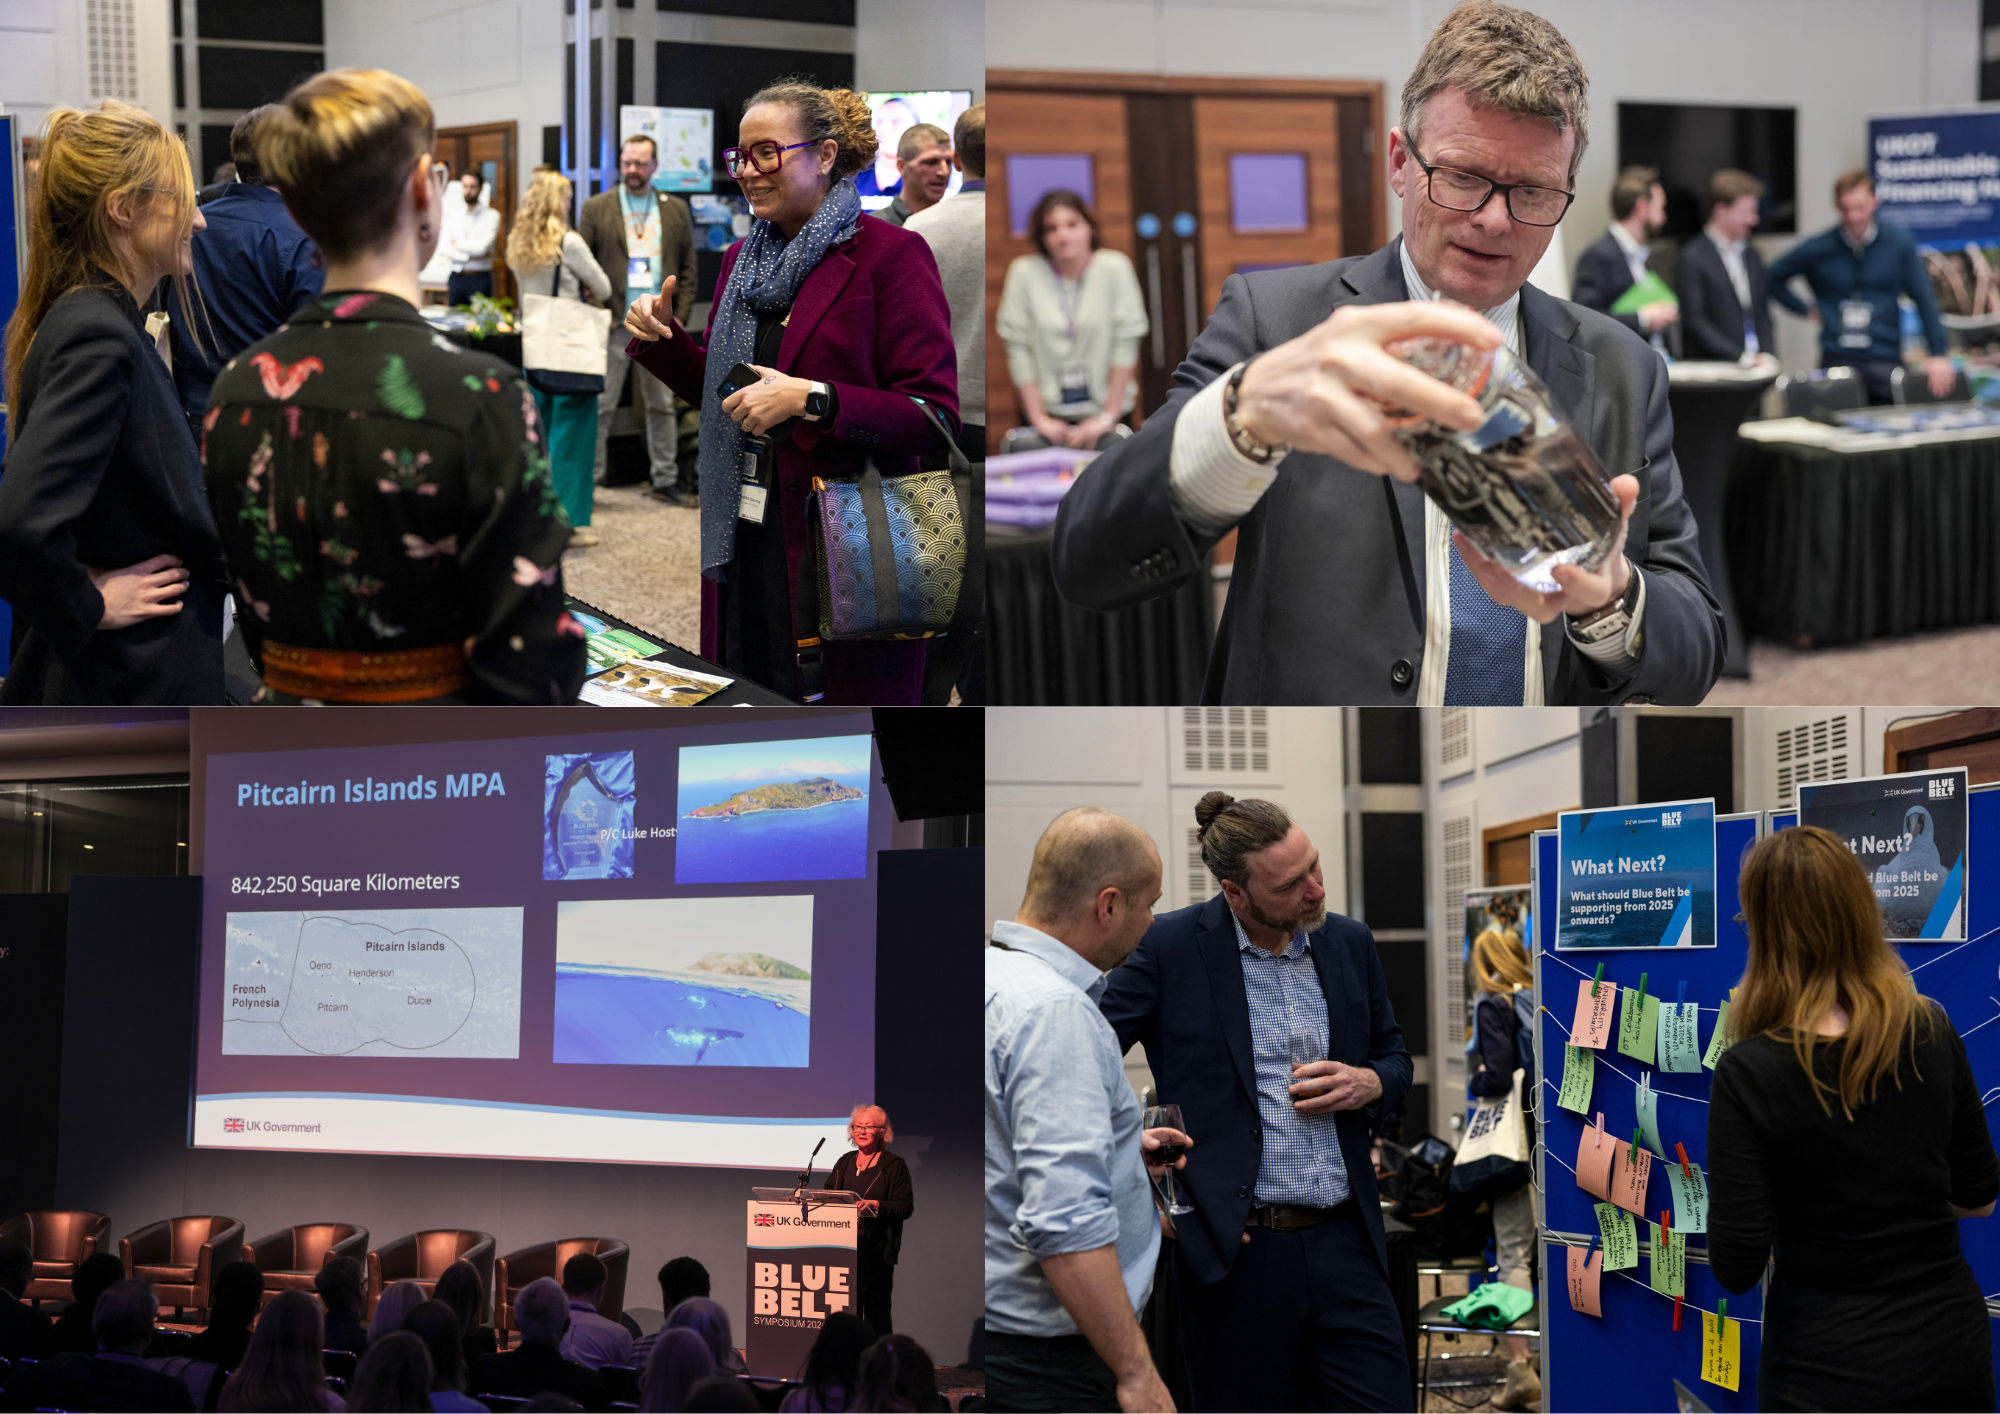 4 pictures. Top left to right: Delegates networking, Minister Richard Benyon examining a sample from RRS Discovery expedition, Melva Evans presents on the Pitcairn MPA, and exhibitors 